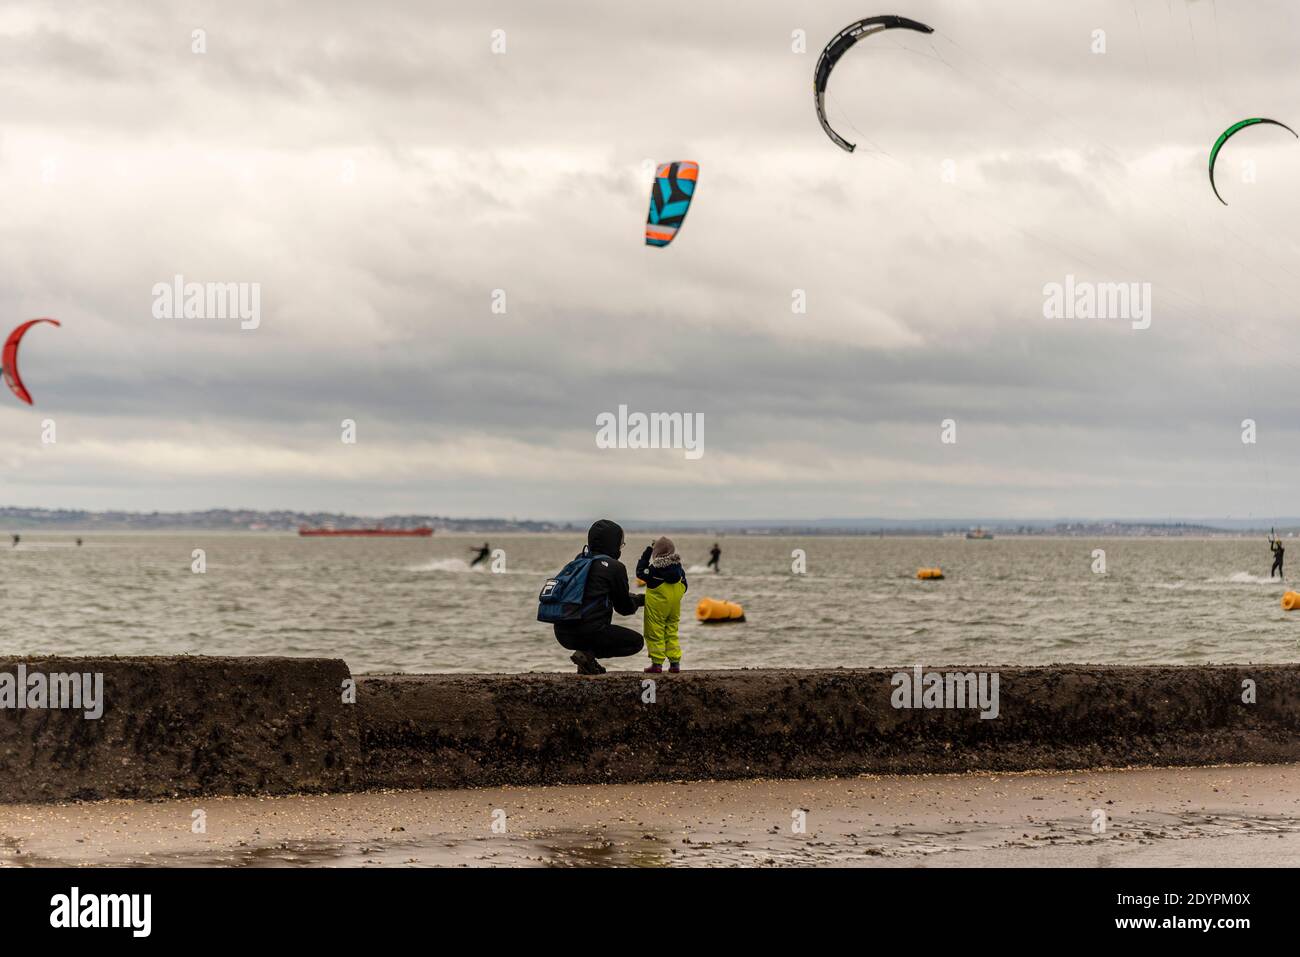 Adult and child watching Kitesurfing on Boxing Day in Southend on Sea, Essex, UK. Inspiring the young. Mother and child together Stock Photo